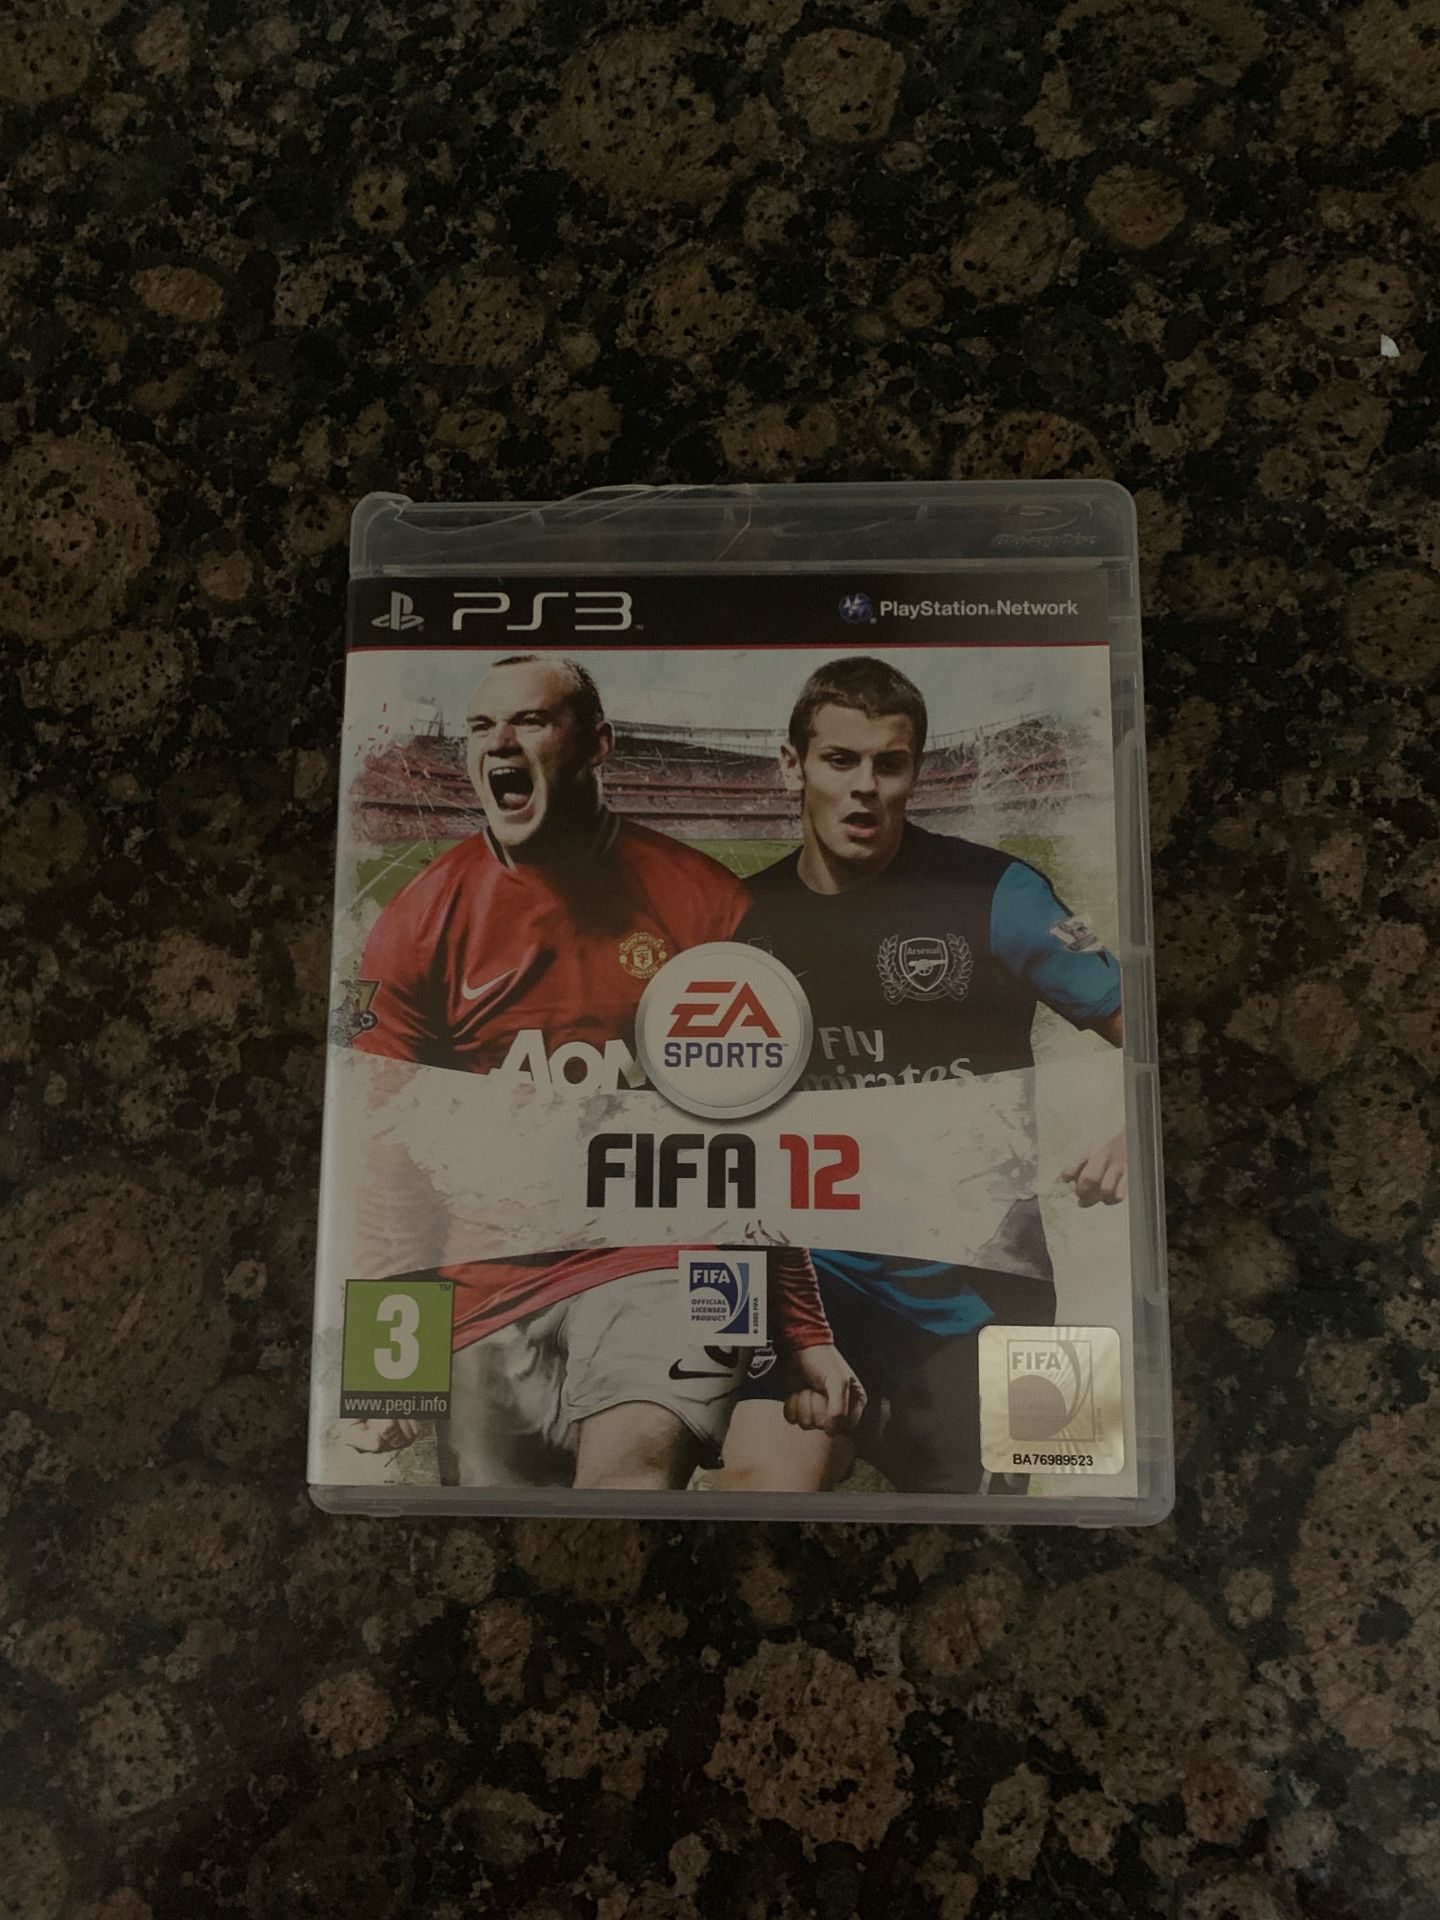 PS3 FIFA 12 game